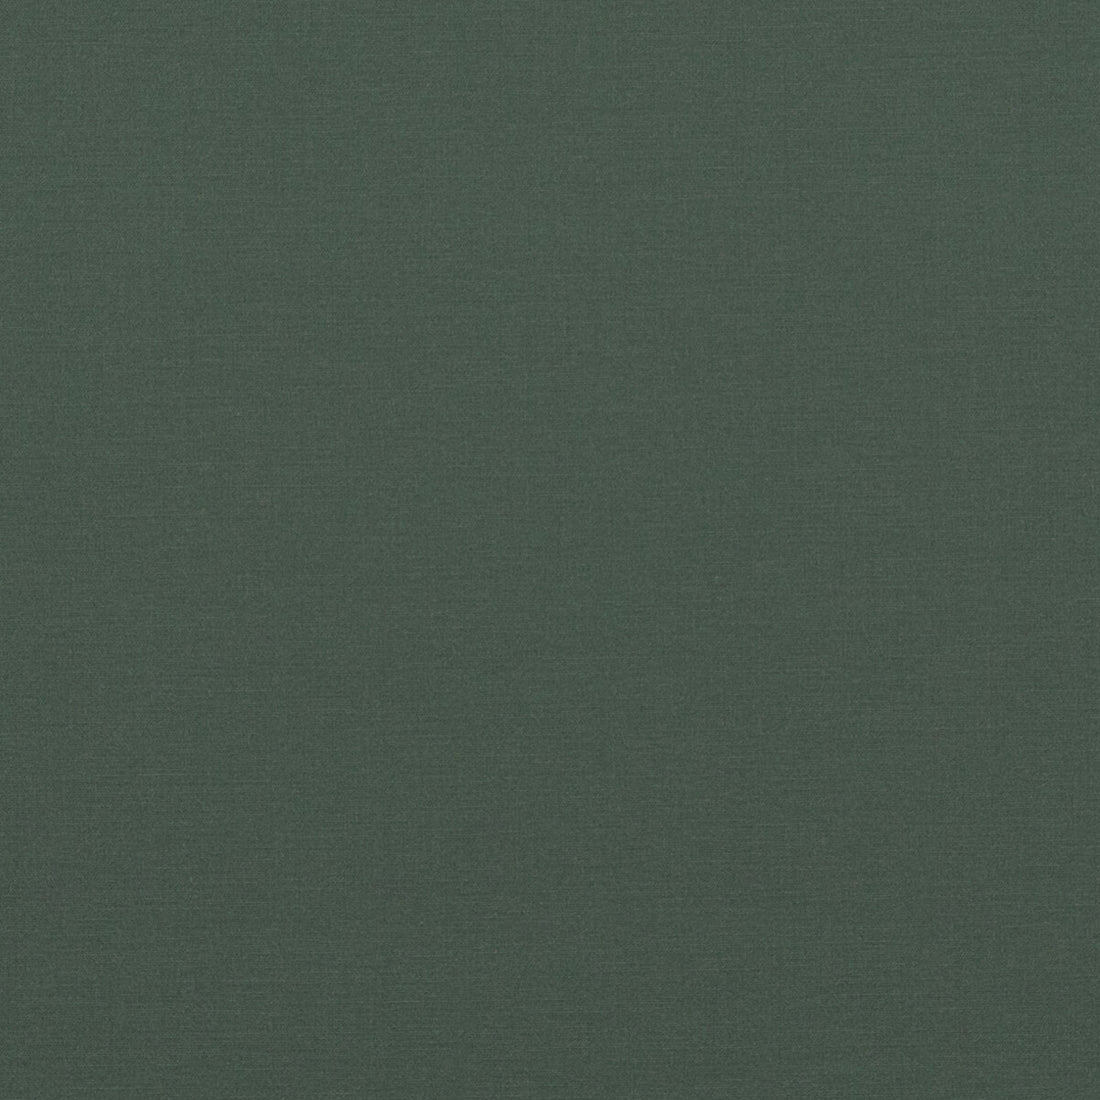 Pavilion fabric in spruce color - pattern PF50478.796.0 - by Baker Lifestyle in the Pavilion - Blegrave Notebook collection